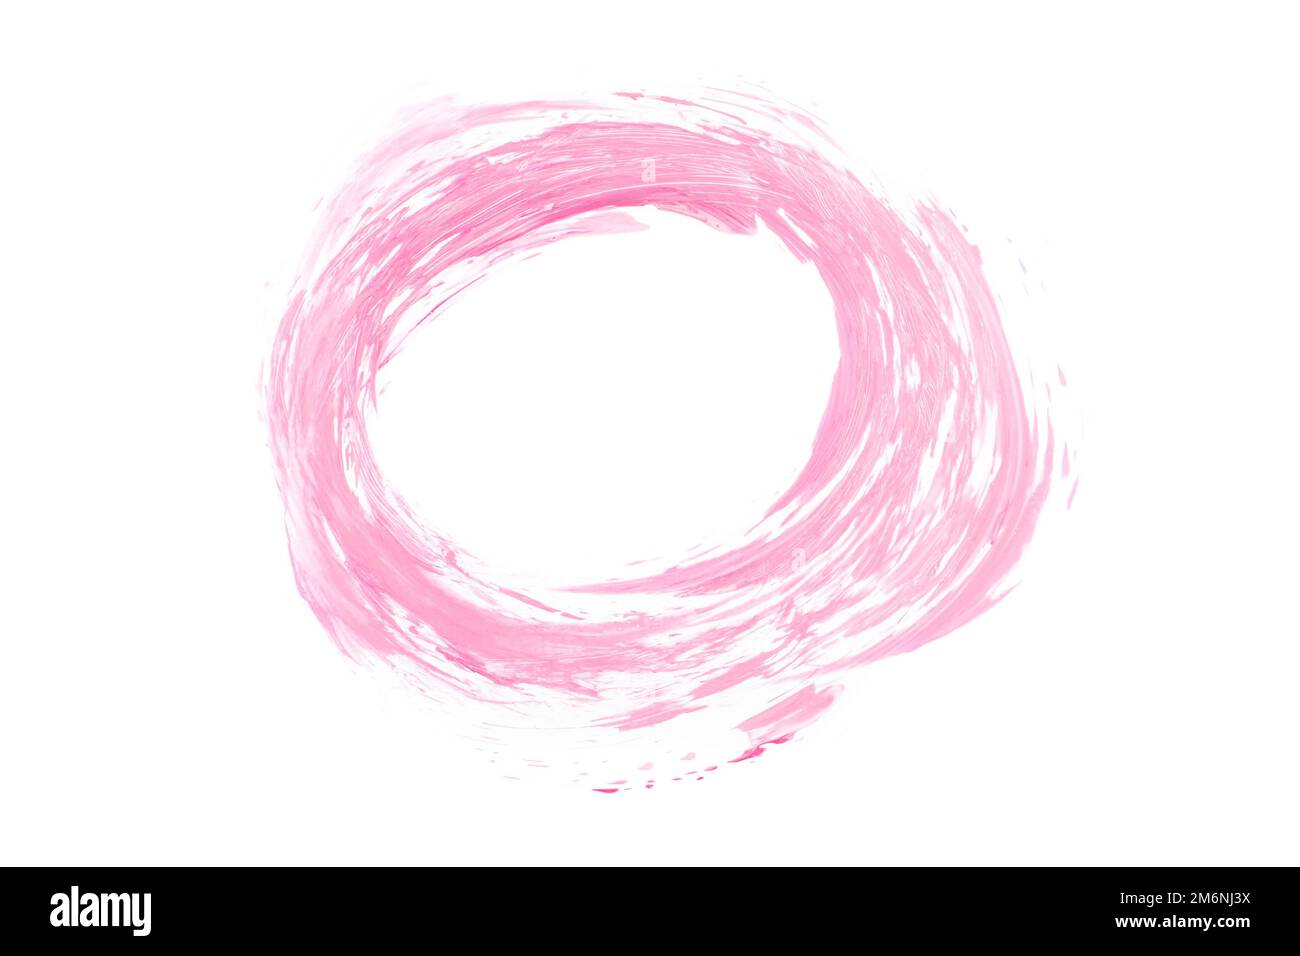 Abstract artistic acrylic pink pastel circle paint brush. Isolated on white background. Stock Photo